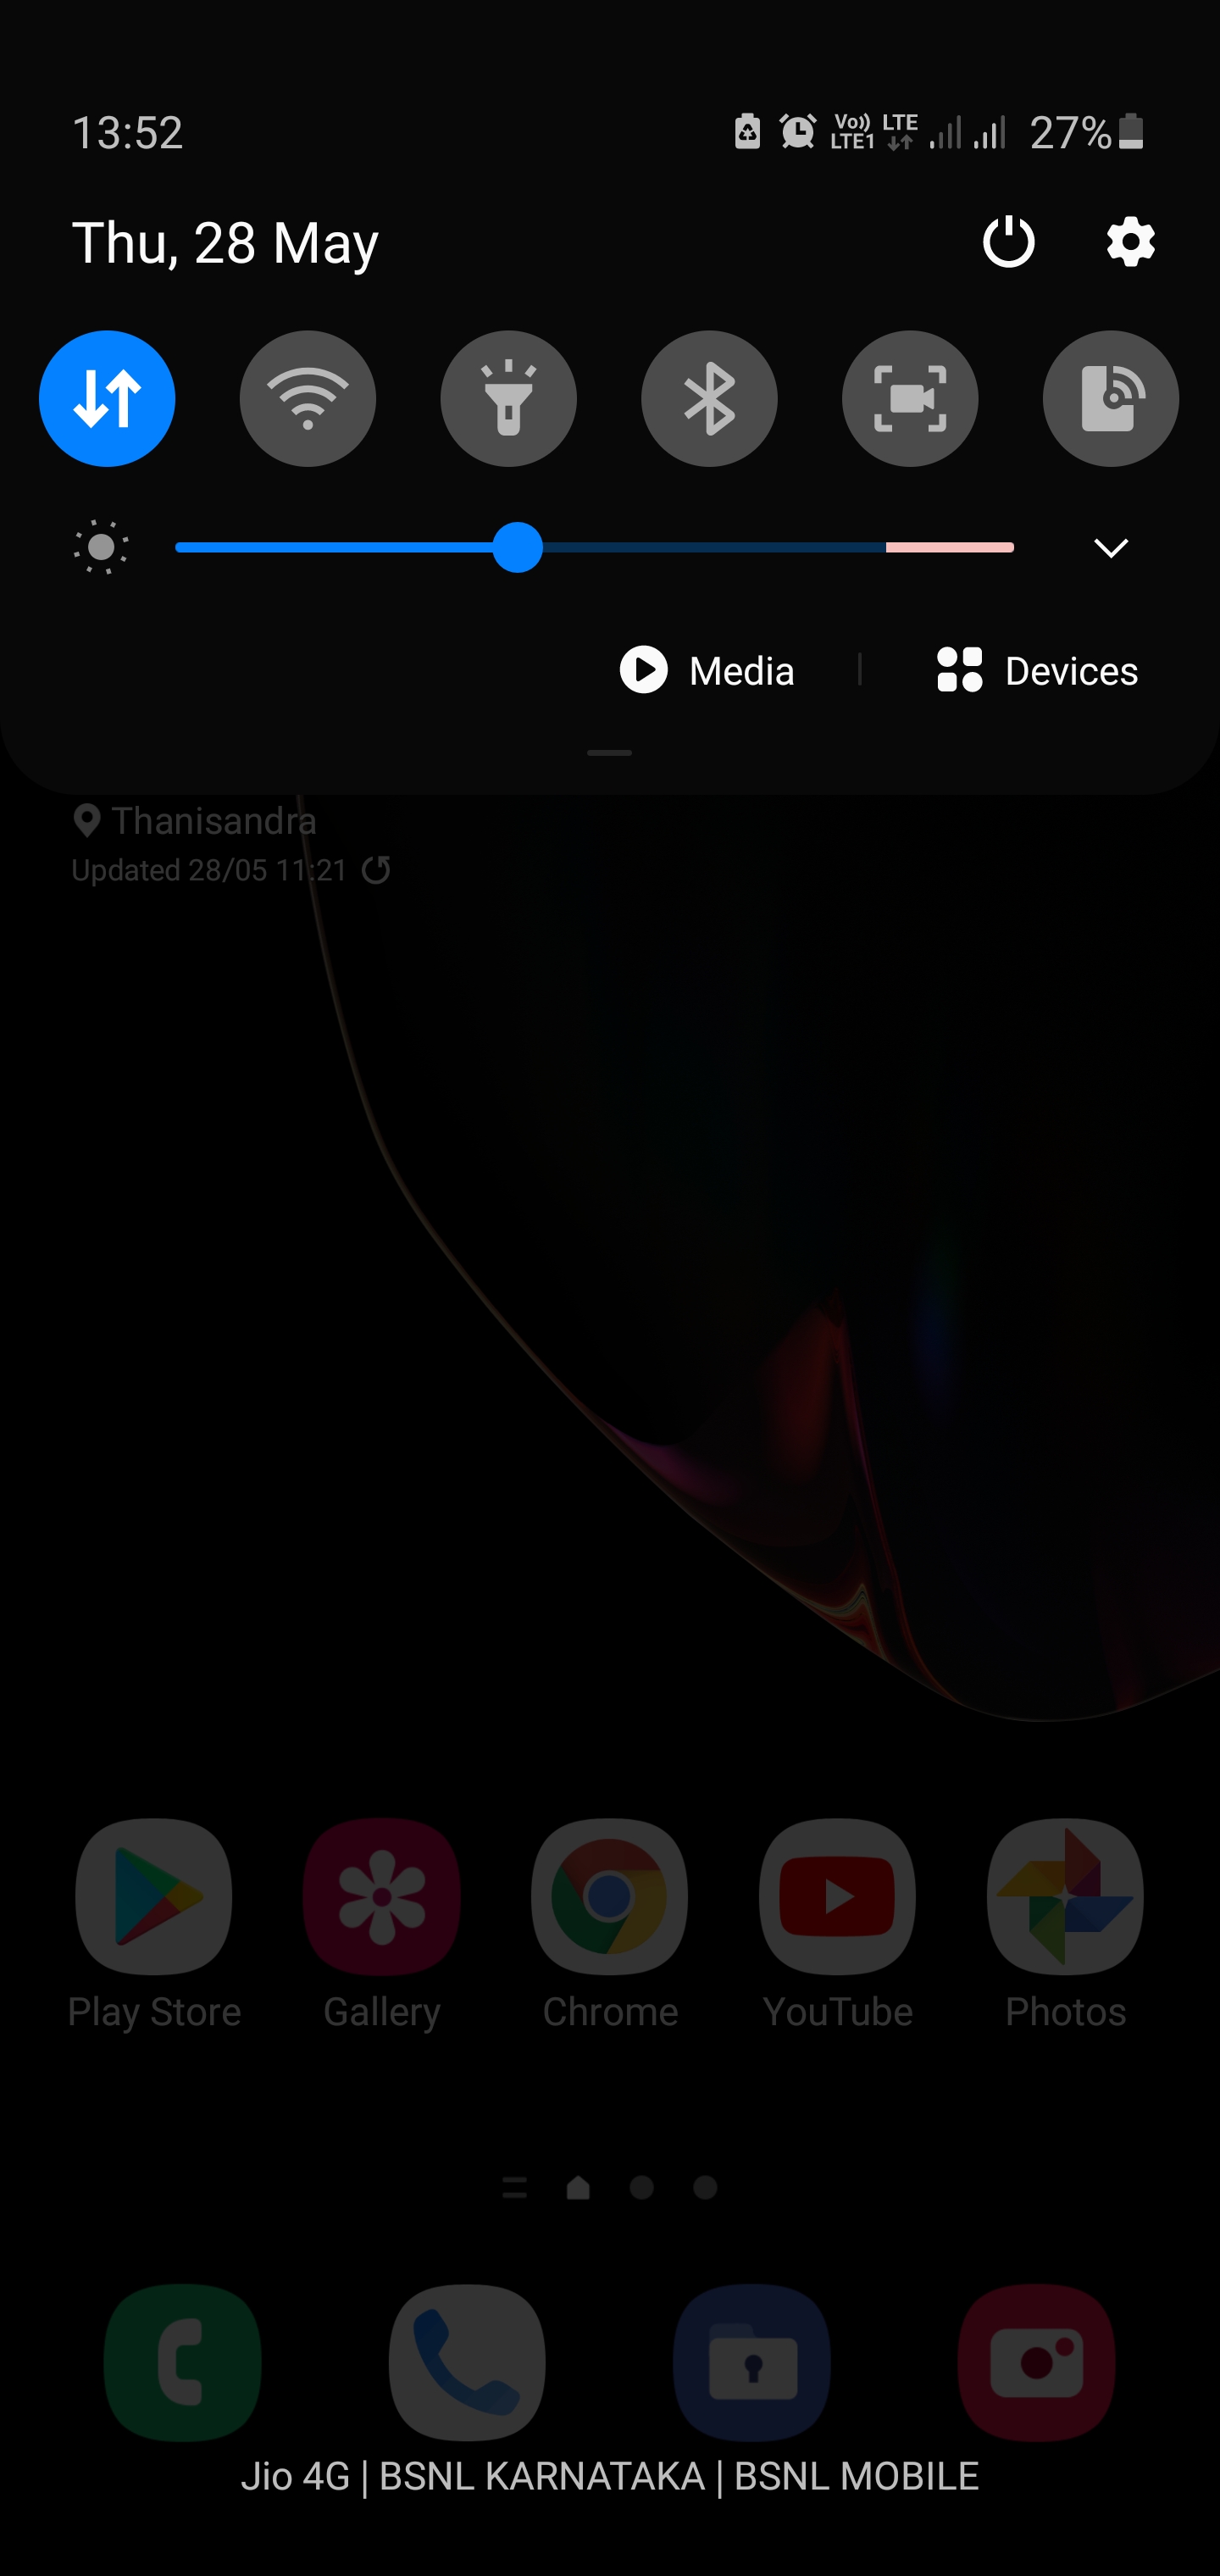 New Battery icon with a triangle in middle showing... - Samsung Members